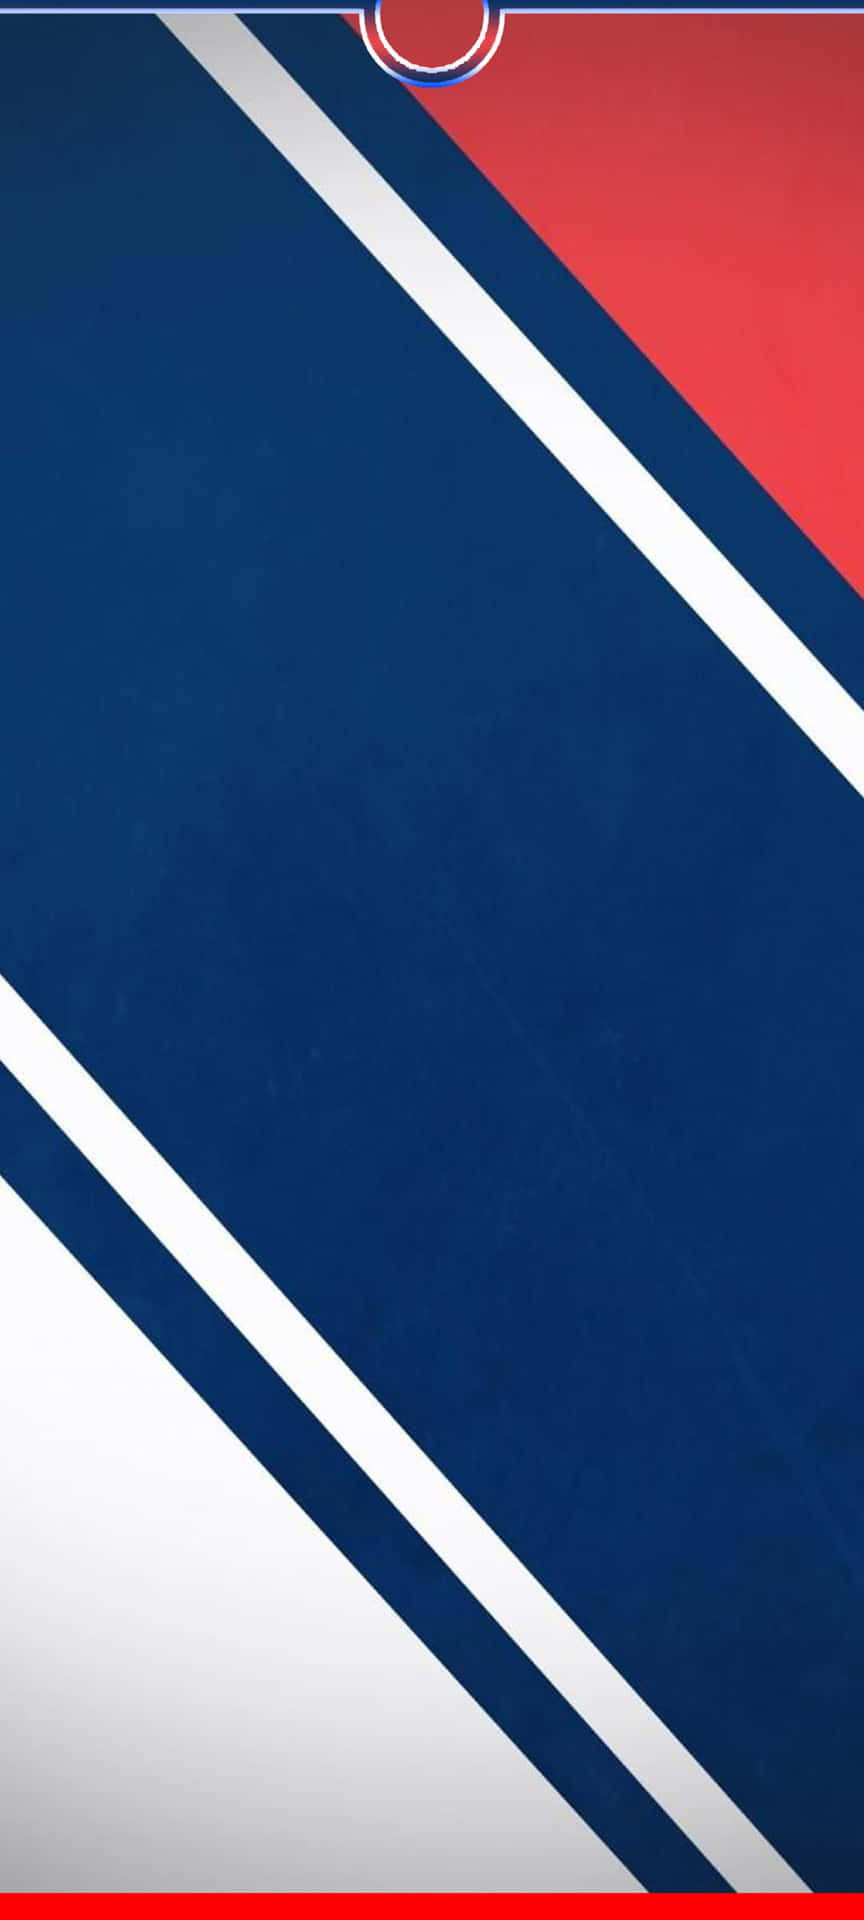 The New York Rangers Logo Is Shown On A Blue And Red Background Wallpaper